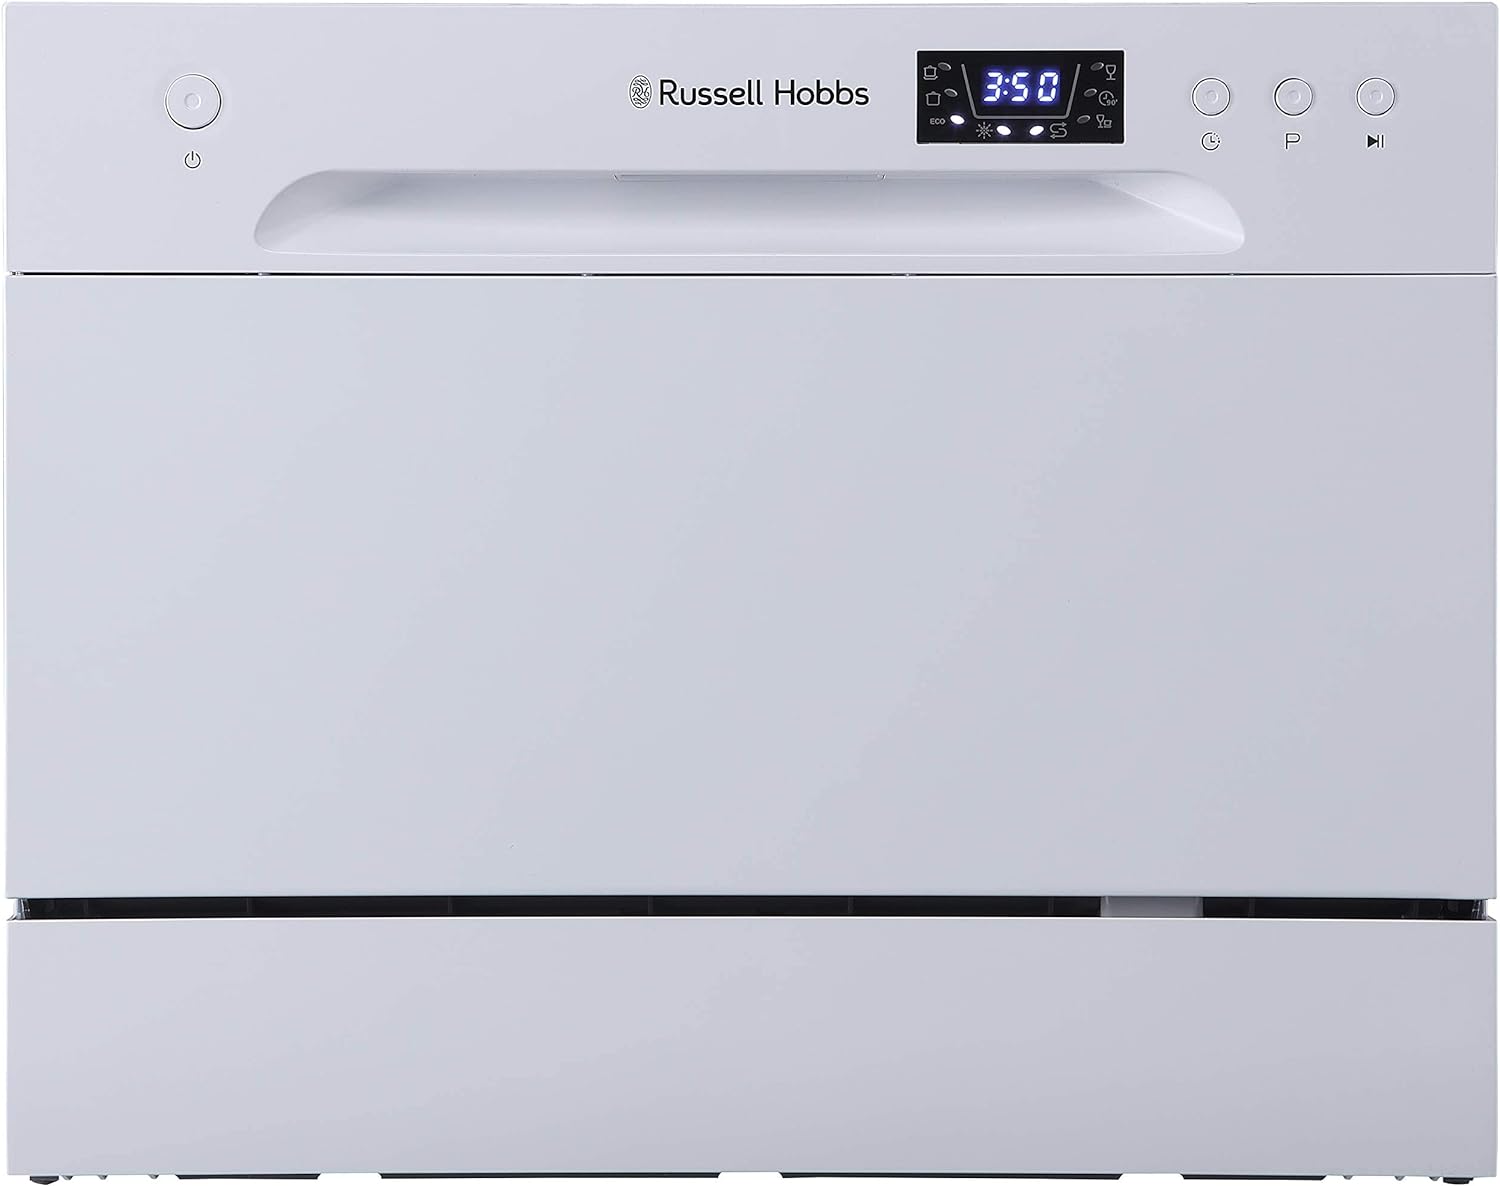 Russell Hobbs RHTTDW6S Freestanding Compact Dishwasher, Eco mode, 6 place settings, Noise level: decibels 52 (Energy Class F), Silver - Amazing Gadgets Outlet